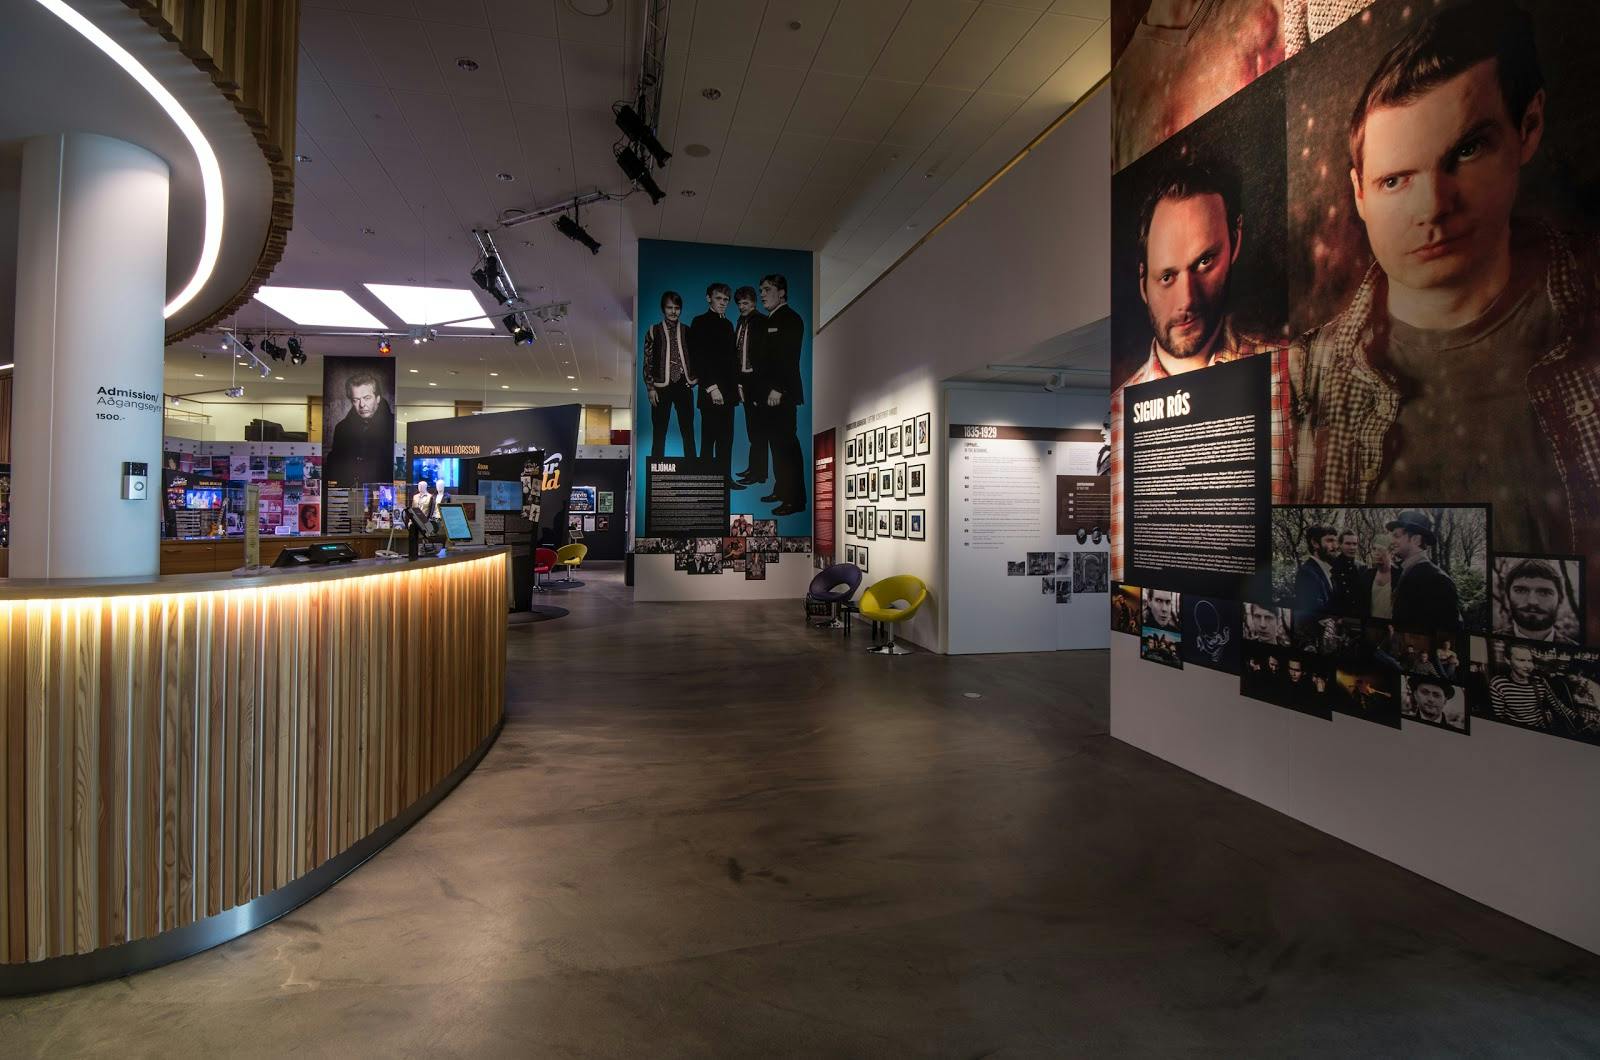 Image - The Icelandic Museum of Rock 'n' Roll